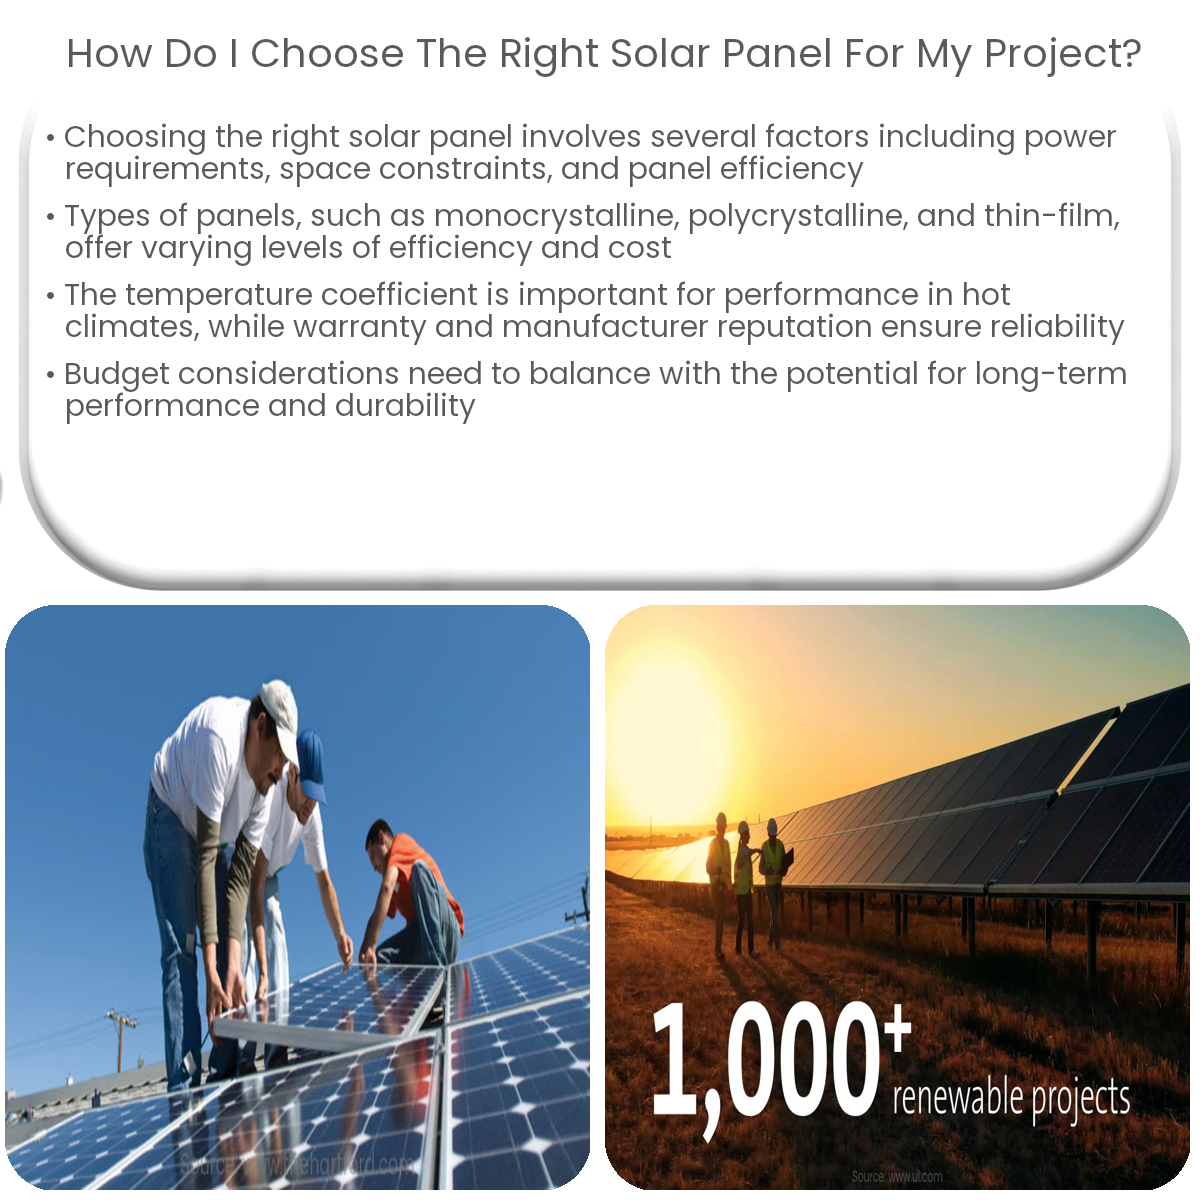 How do I choose the right solar panel for my project?